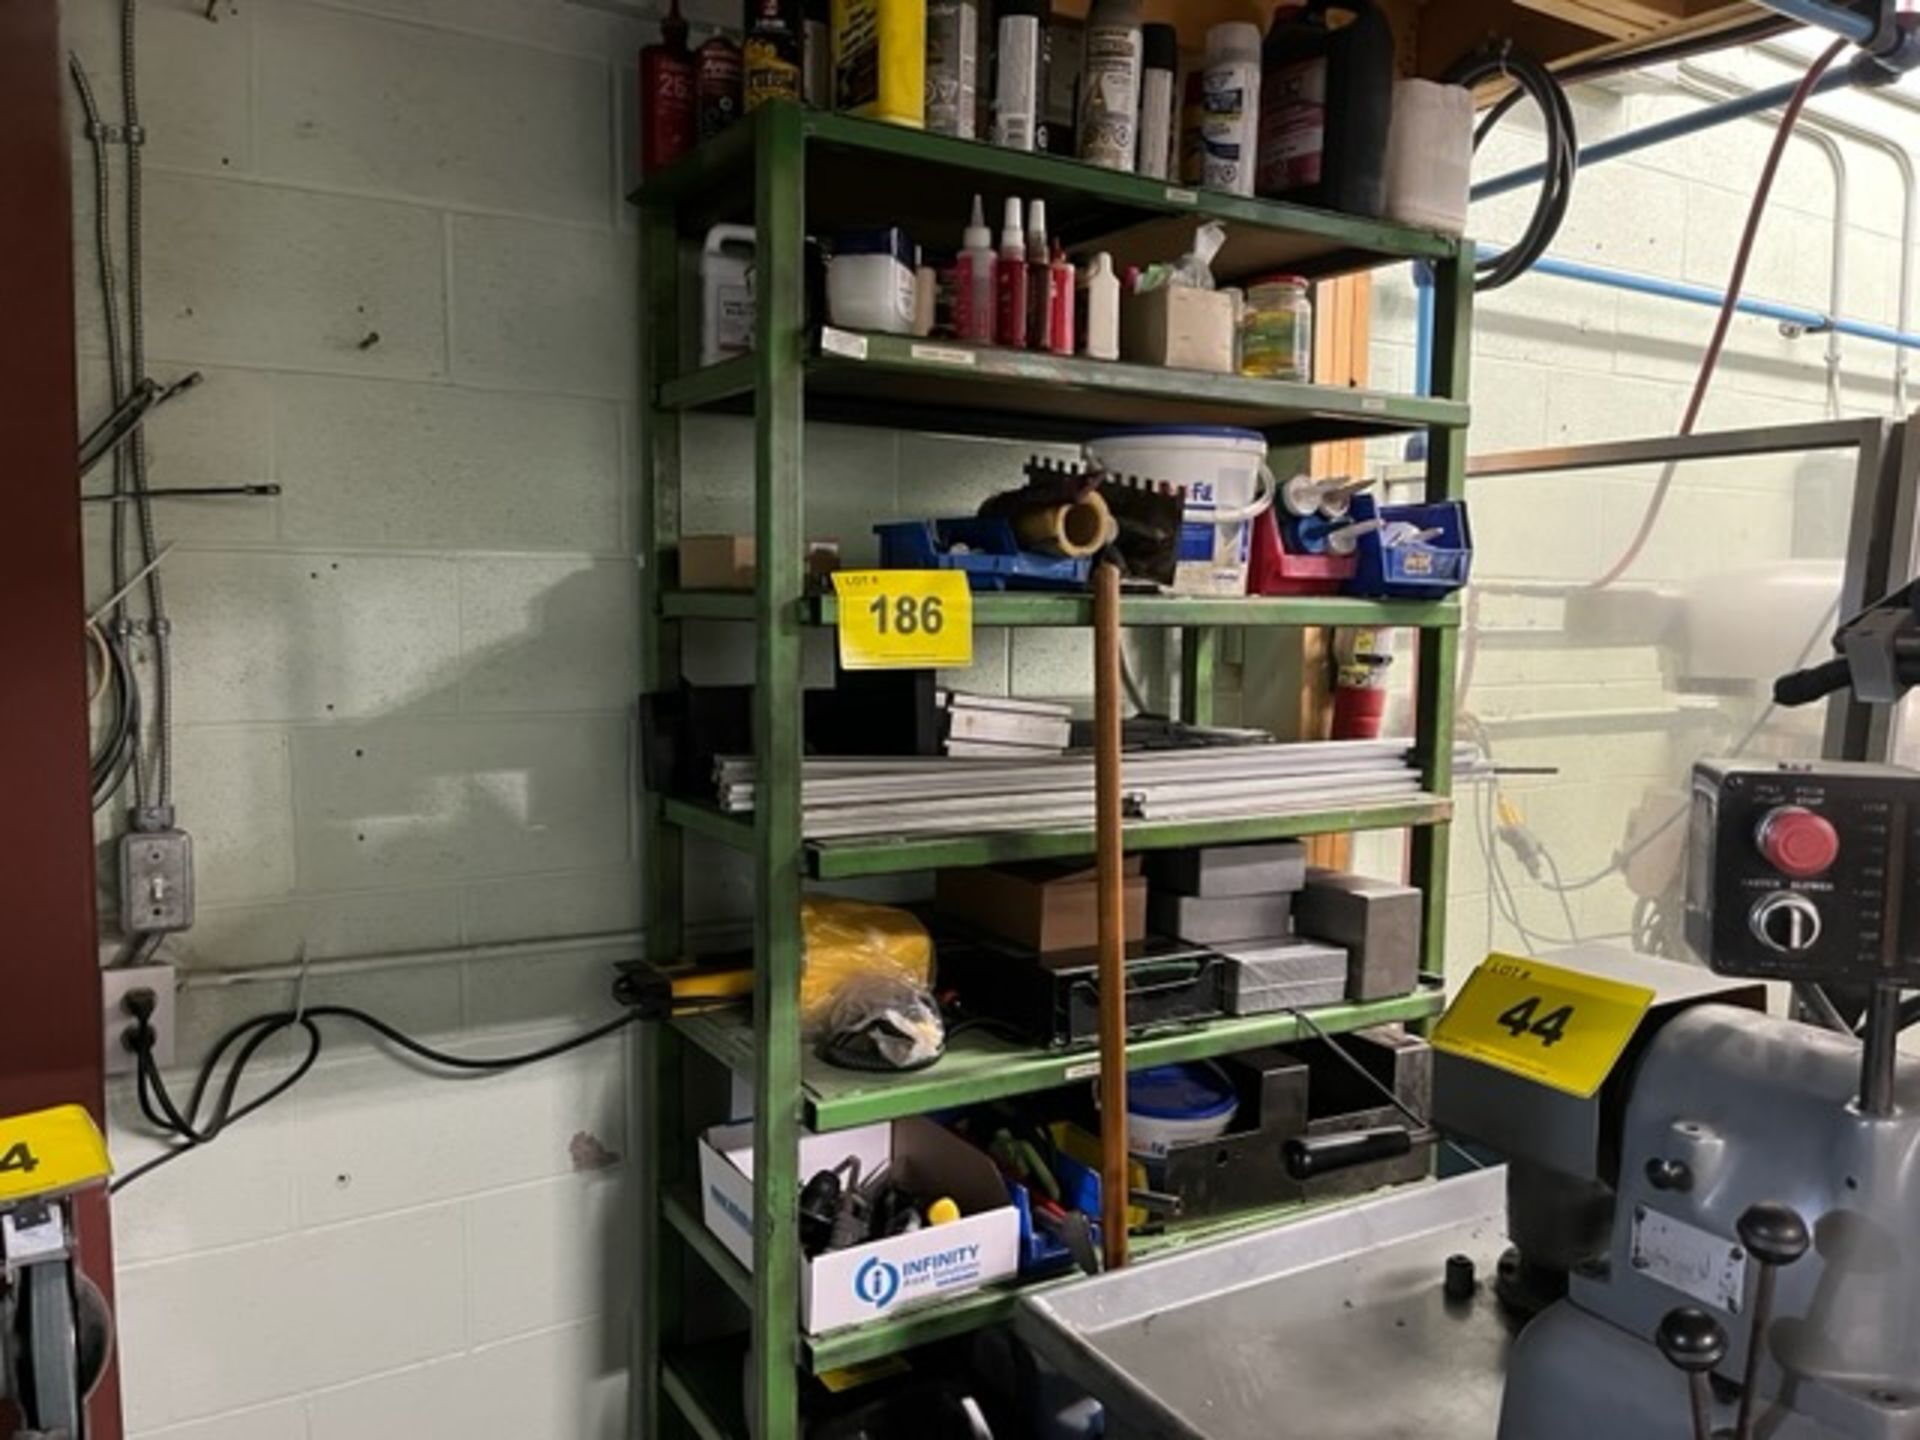 9-LEVEL HEAVY DUTY STEEL SHELVING UNIT W/ MAINTENANCE CONTENTS AND 6-LEVEL CABINET